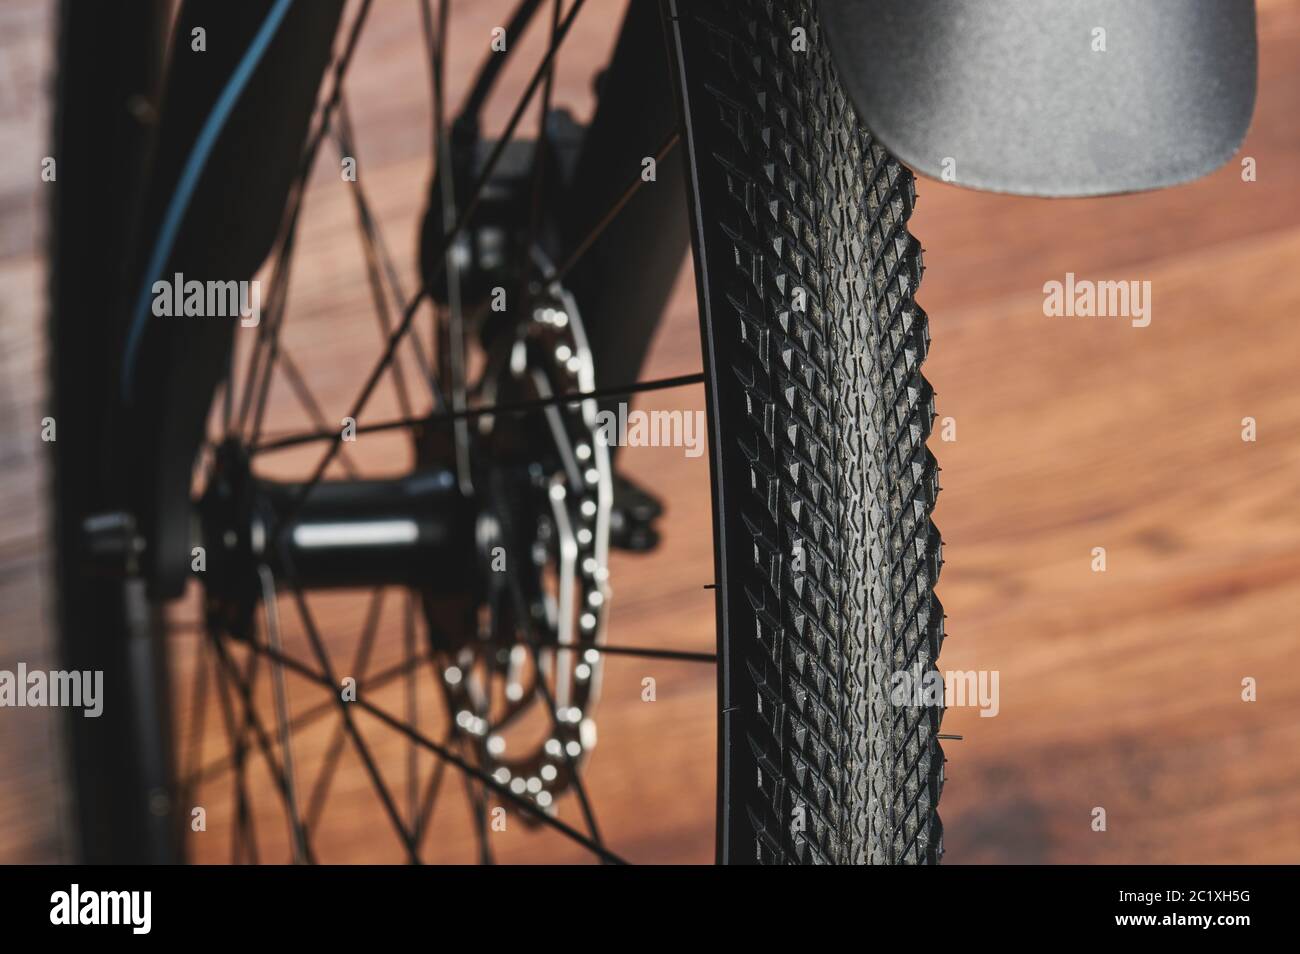 Clean bicycle tire wheel close up view. Maintenance service of bicycle theme Stock Photo